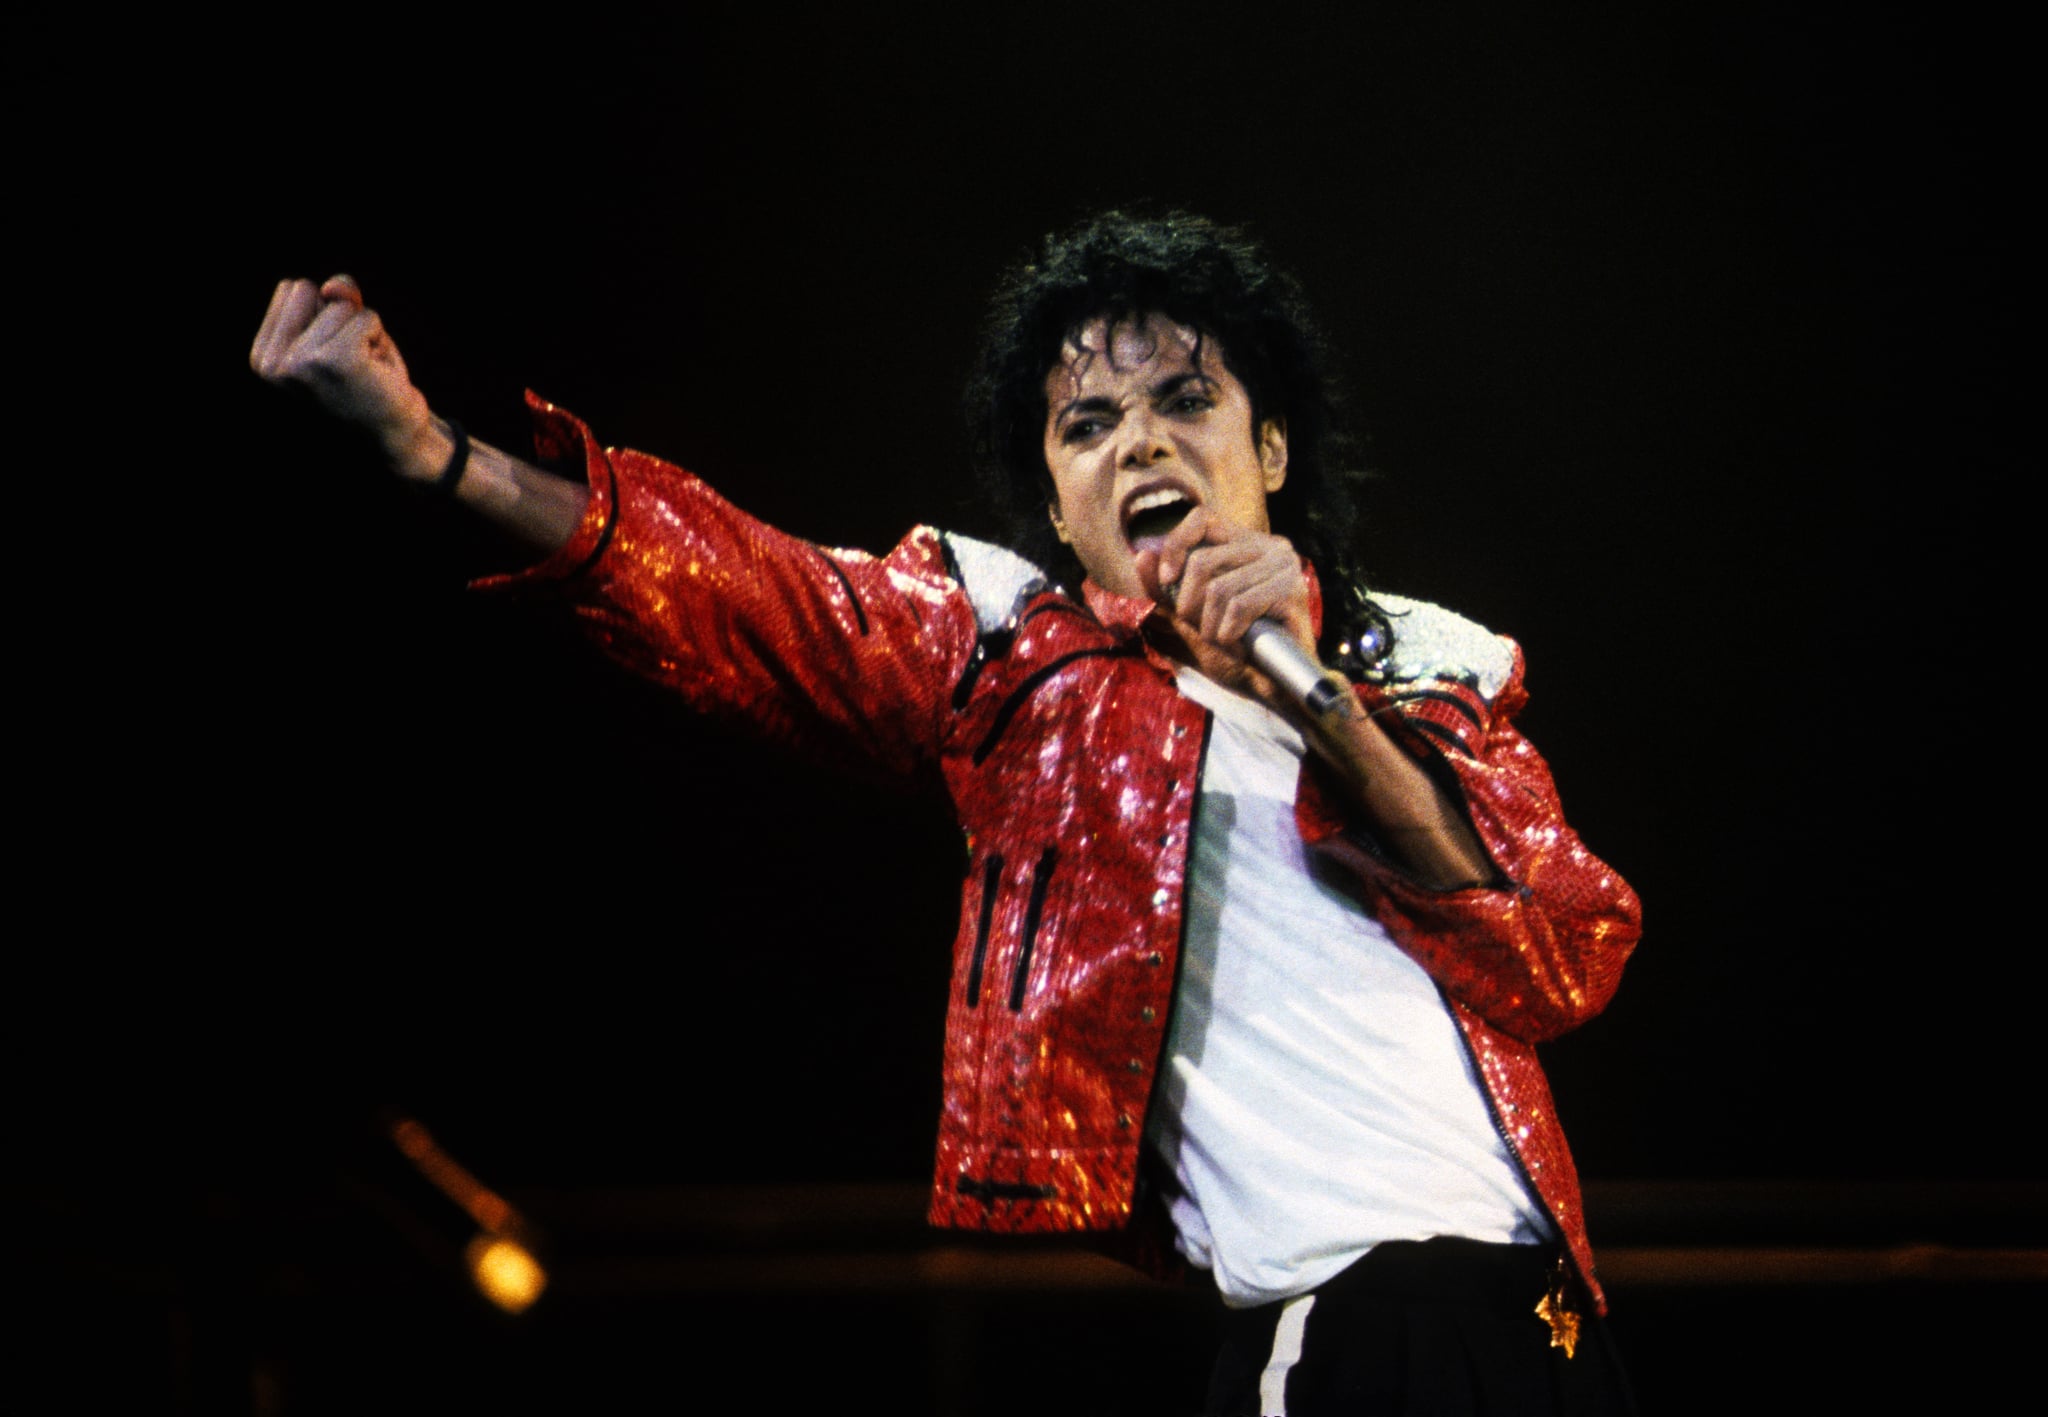 VARIOUS, VARIOUS - JUNE 25: Michael Jackson performs in concert circa 1986. (Photo by Kevin Mazur/WireImage)